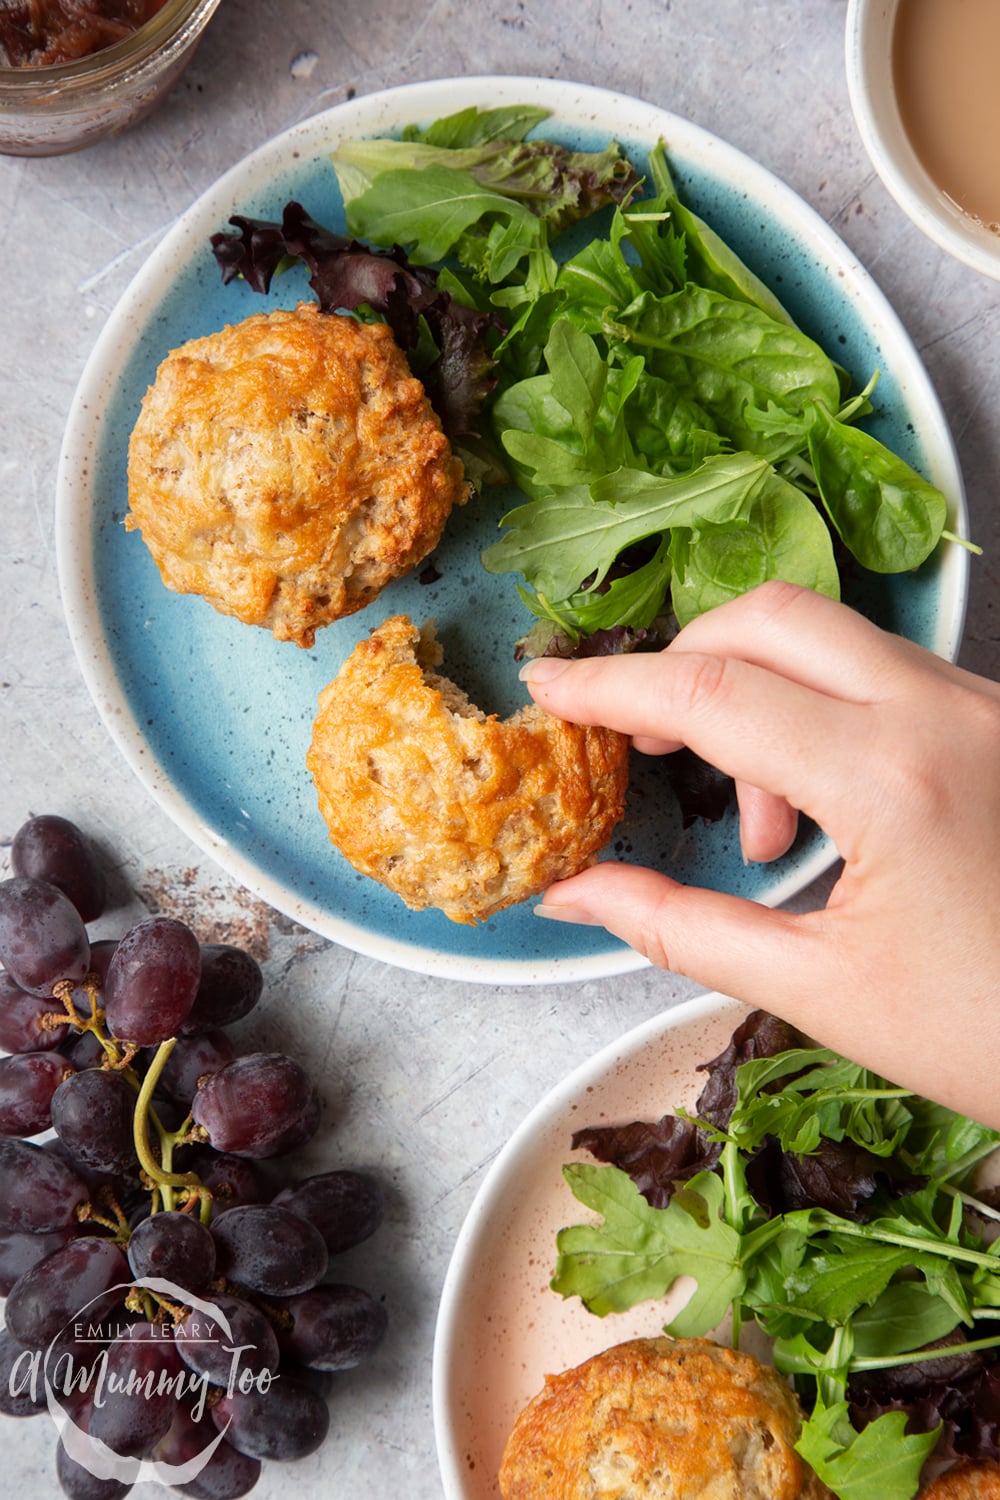 Easy cheese muffins served to two plates with leafy salad. One has a bite out of it and a hand reaches to take it.